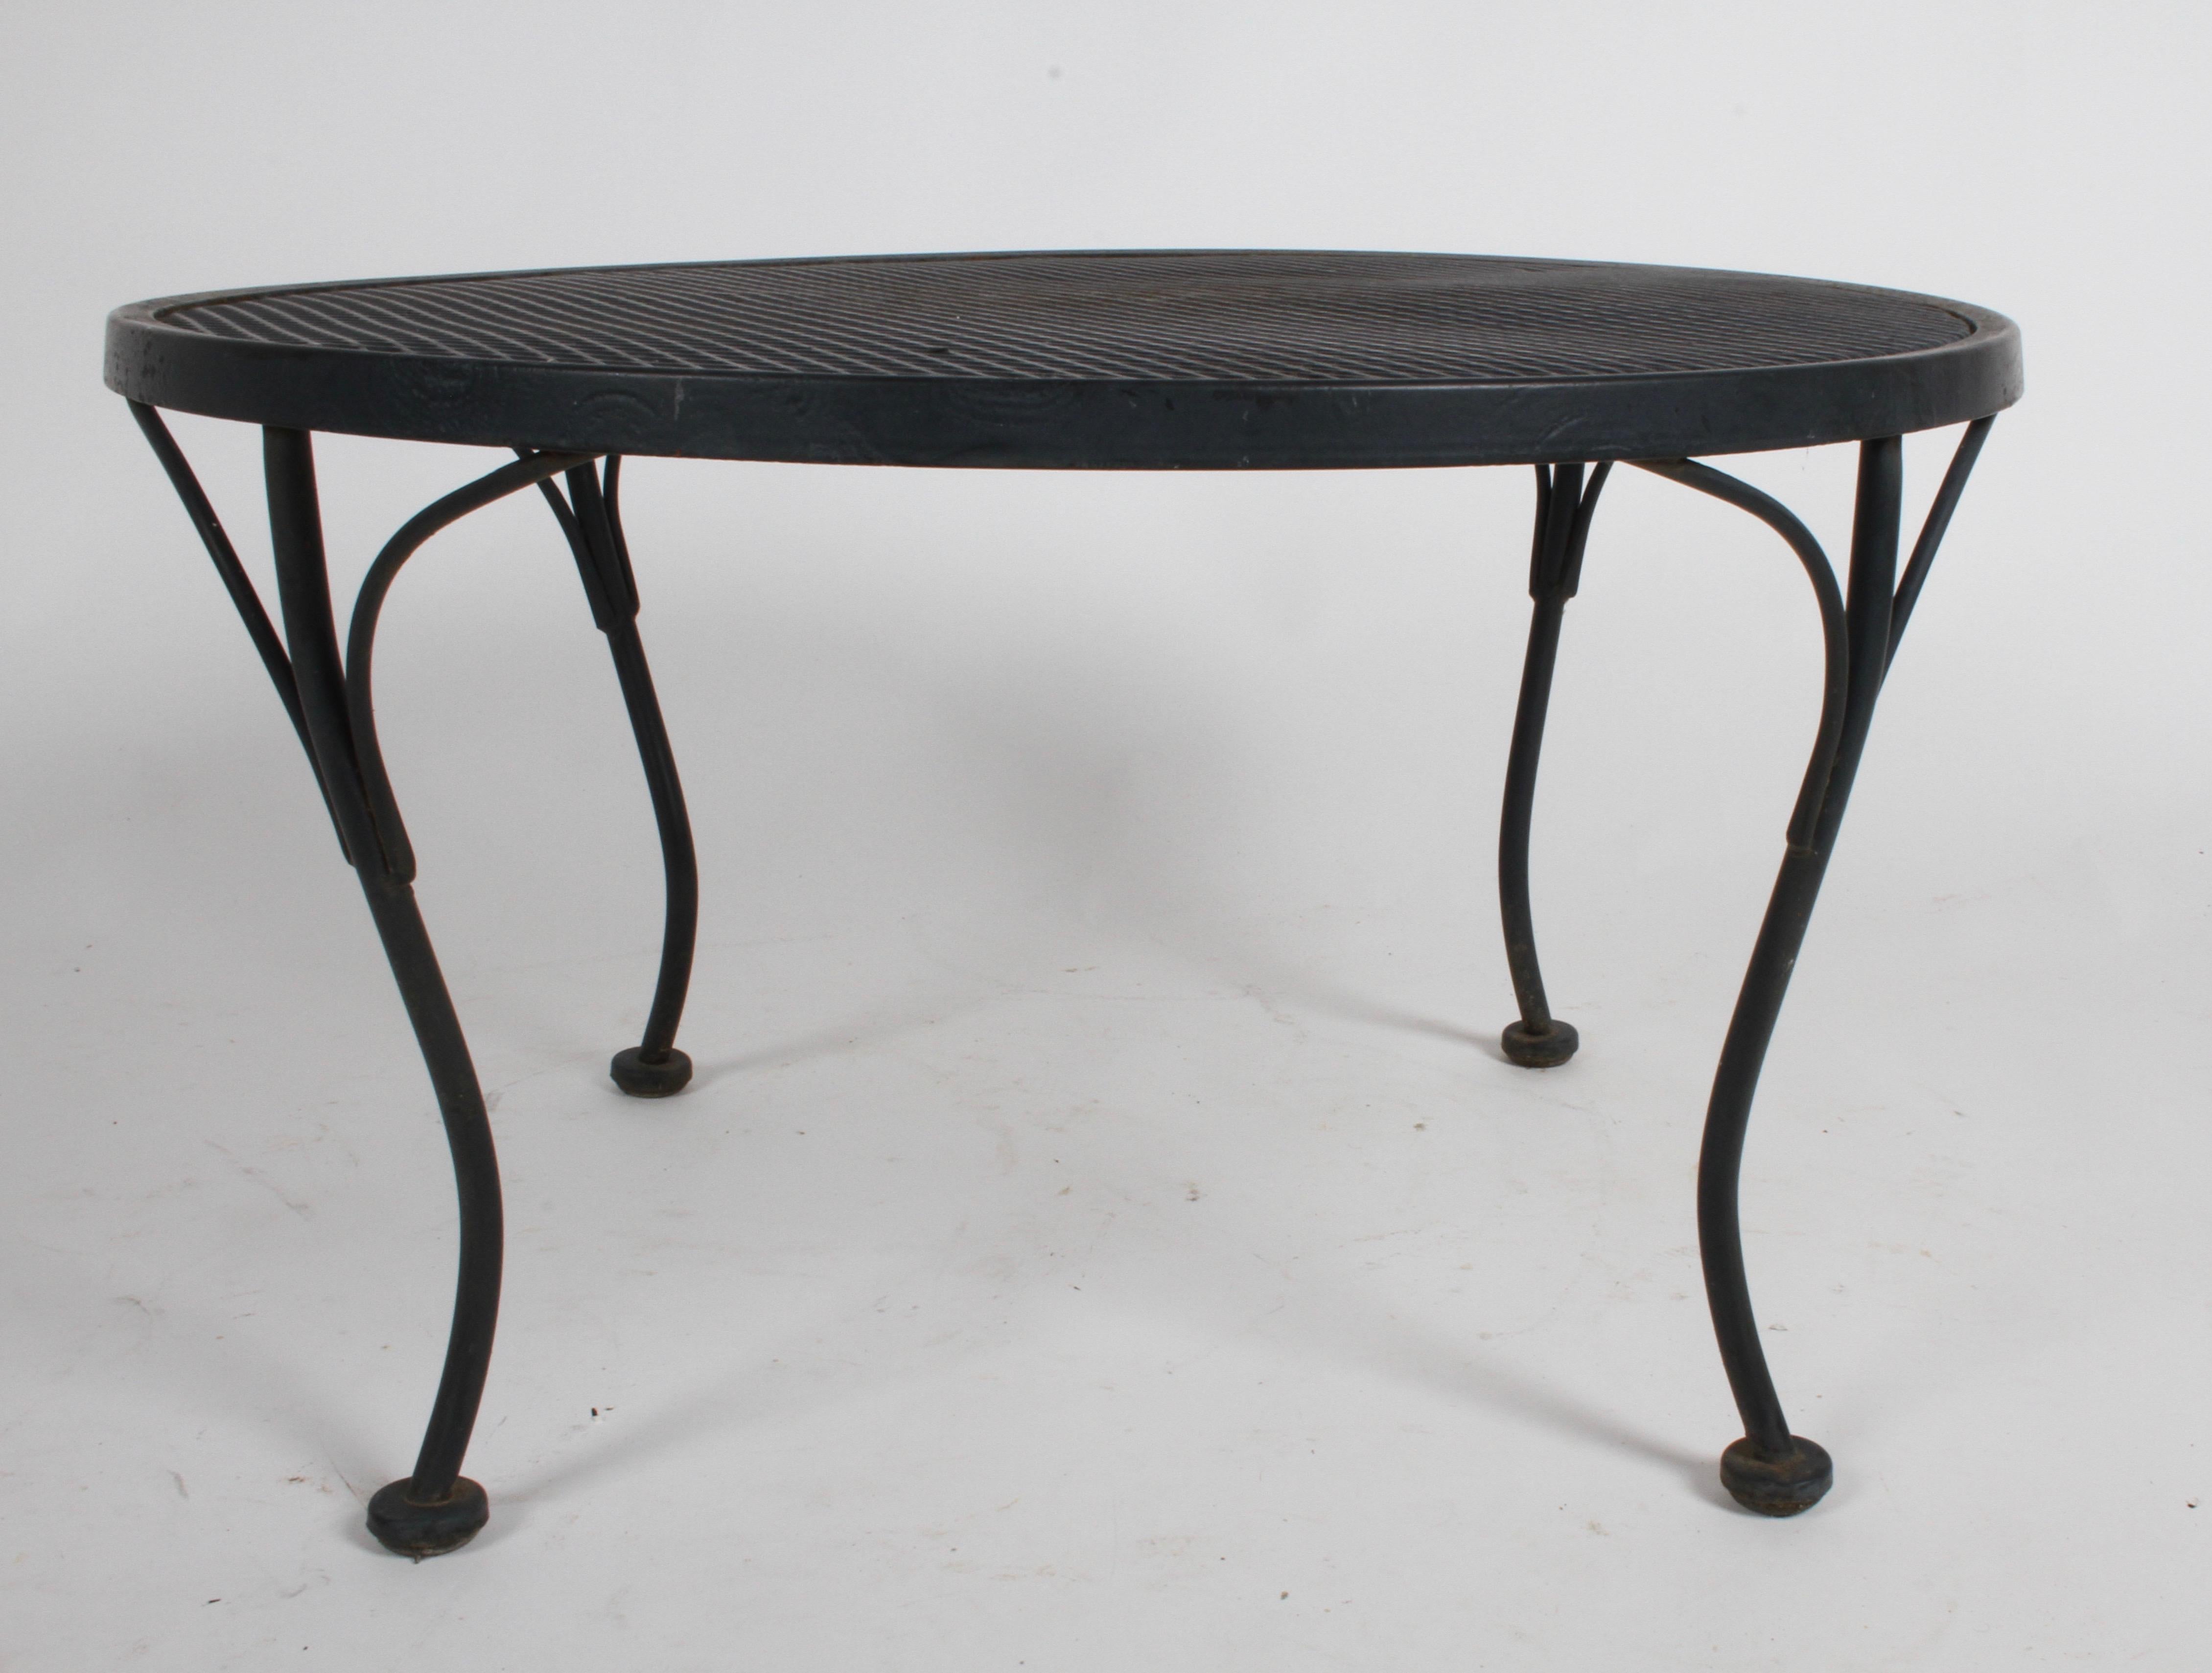 Russell Woodard designed round coffee or side often see along side his Sculptura line chairs and settees. Shown in original black paint, from one owner estate, circa 1950s. Overall very nice condition, lite rust to underside. Can be refinished if